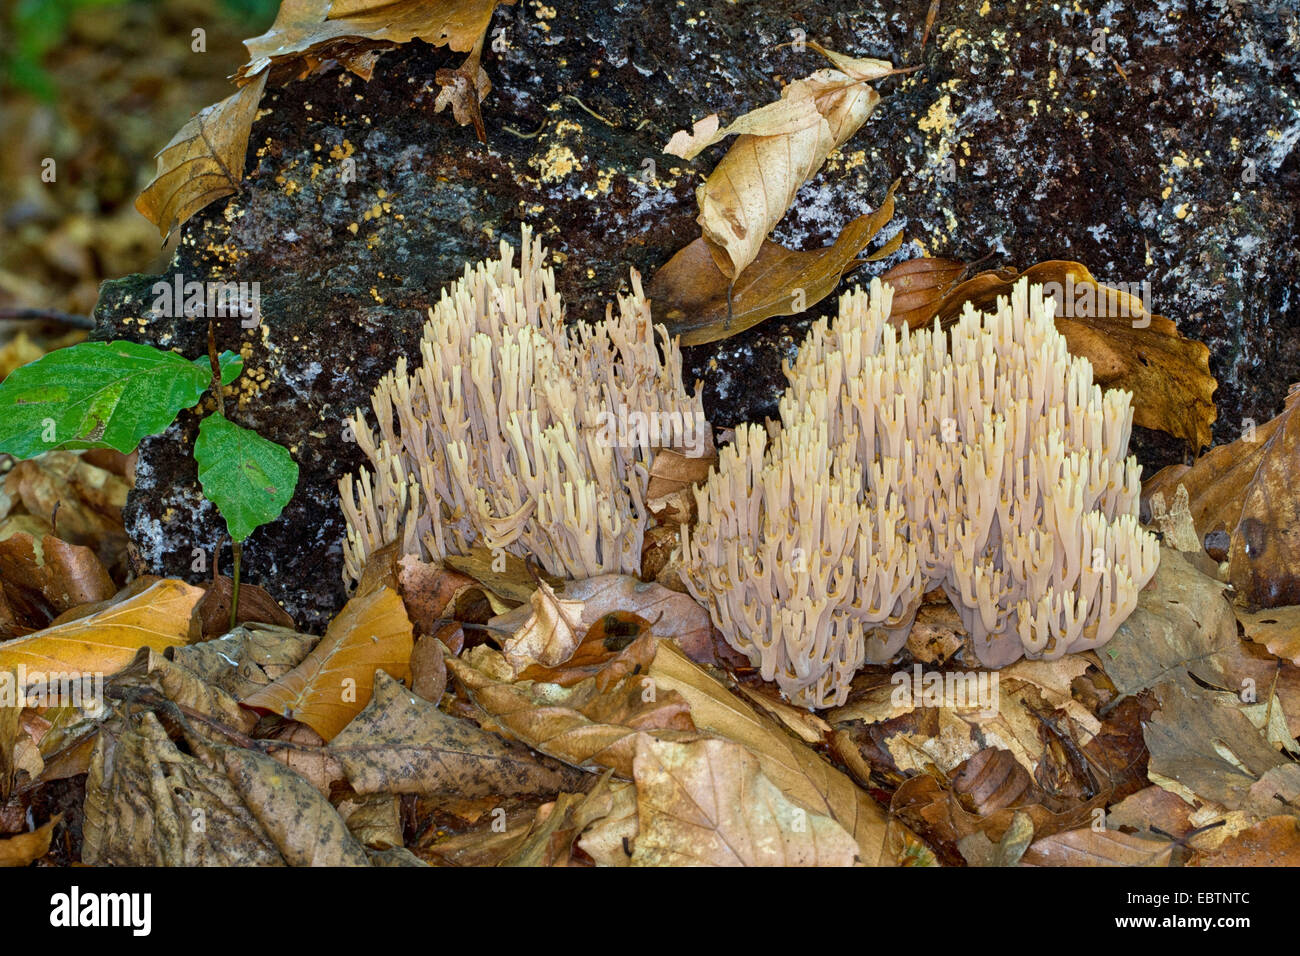 Upright coral (Ramaria stricta), at the foot of a tree trunk, Germany, Mecklenburg-Western Pomerania Stock Photo